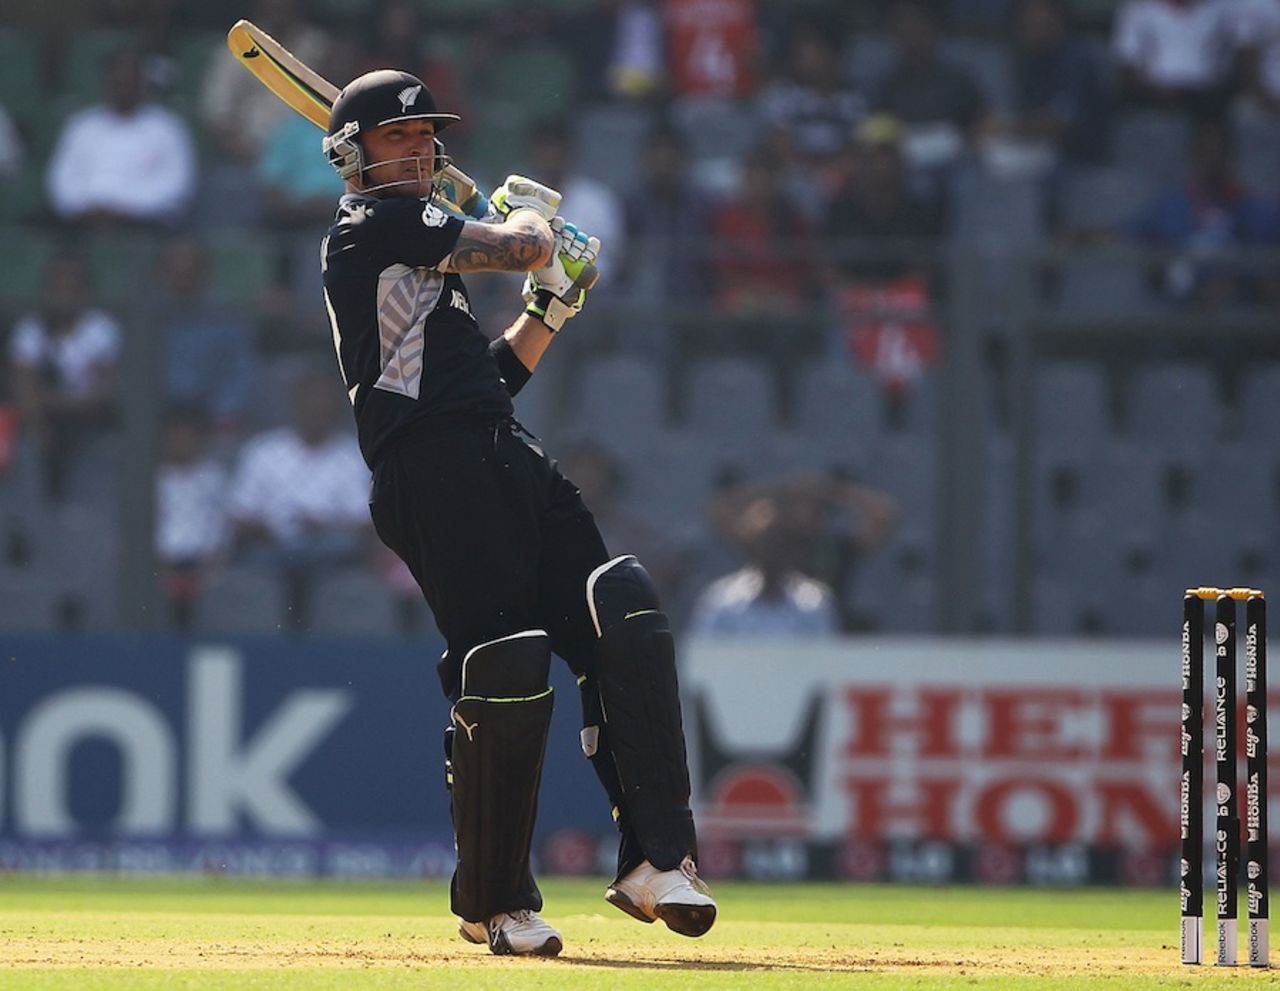 Brendon McCullum pulls during his century, Canada v New Zealand, Group A, World Cup 2011, Mumbai, March 13, 2011